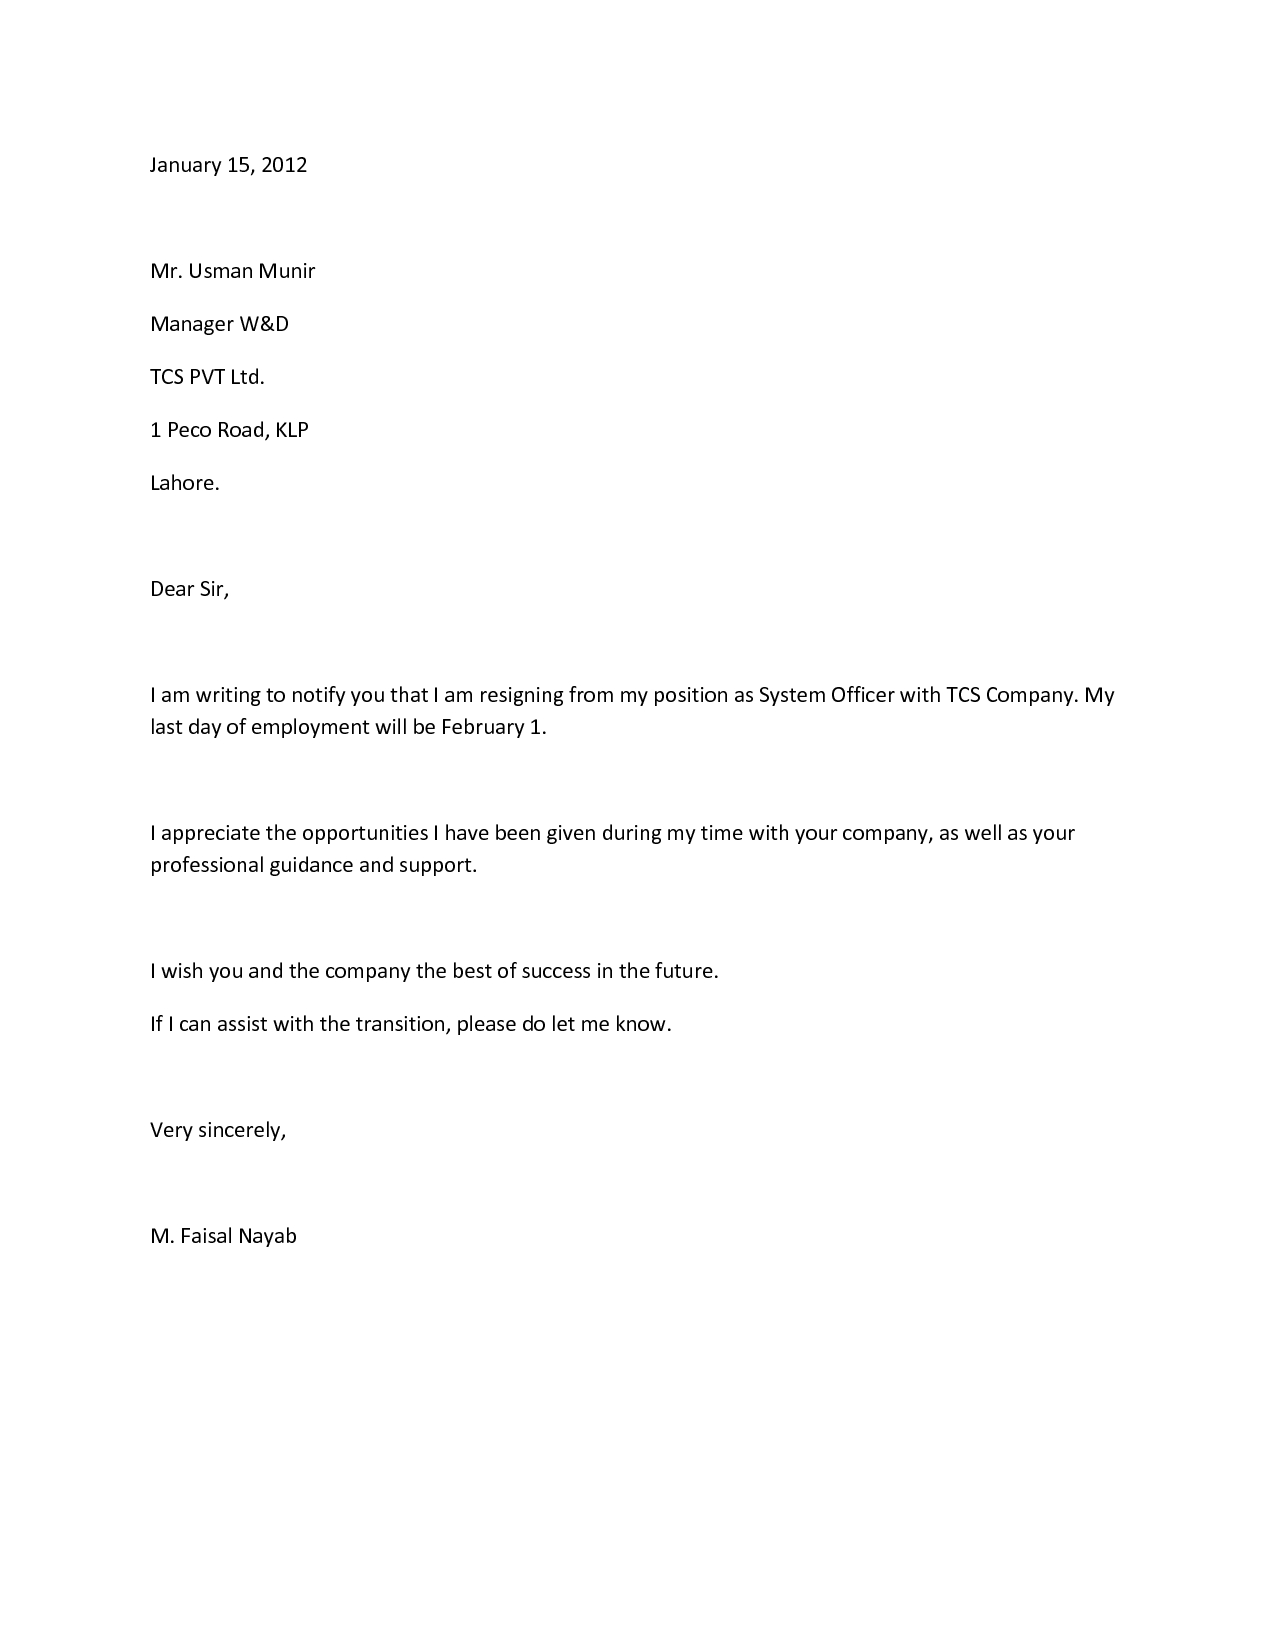 Immediate Resignation Letter Template - How to Write A Proper Resignation Letter Images